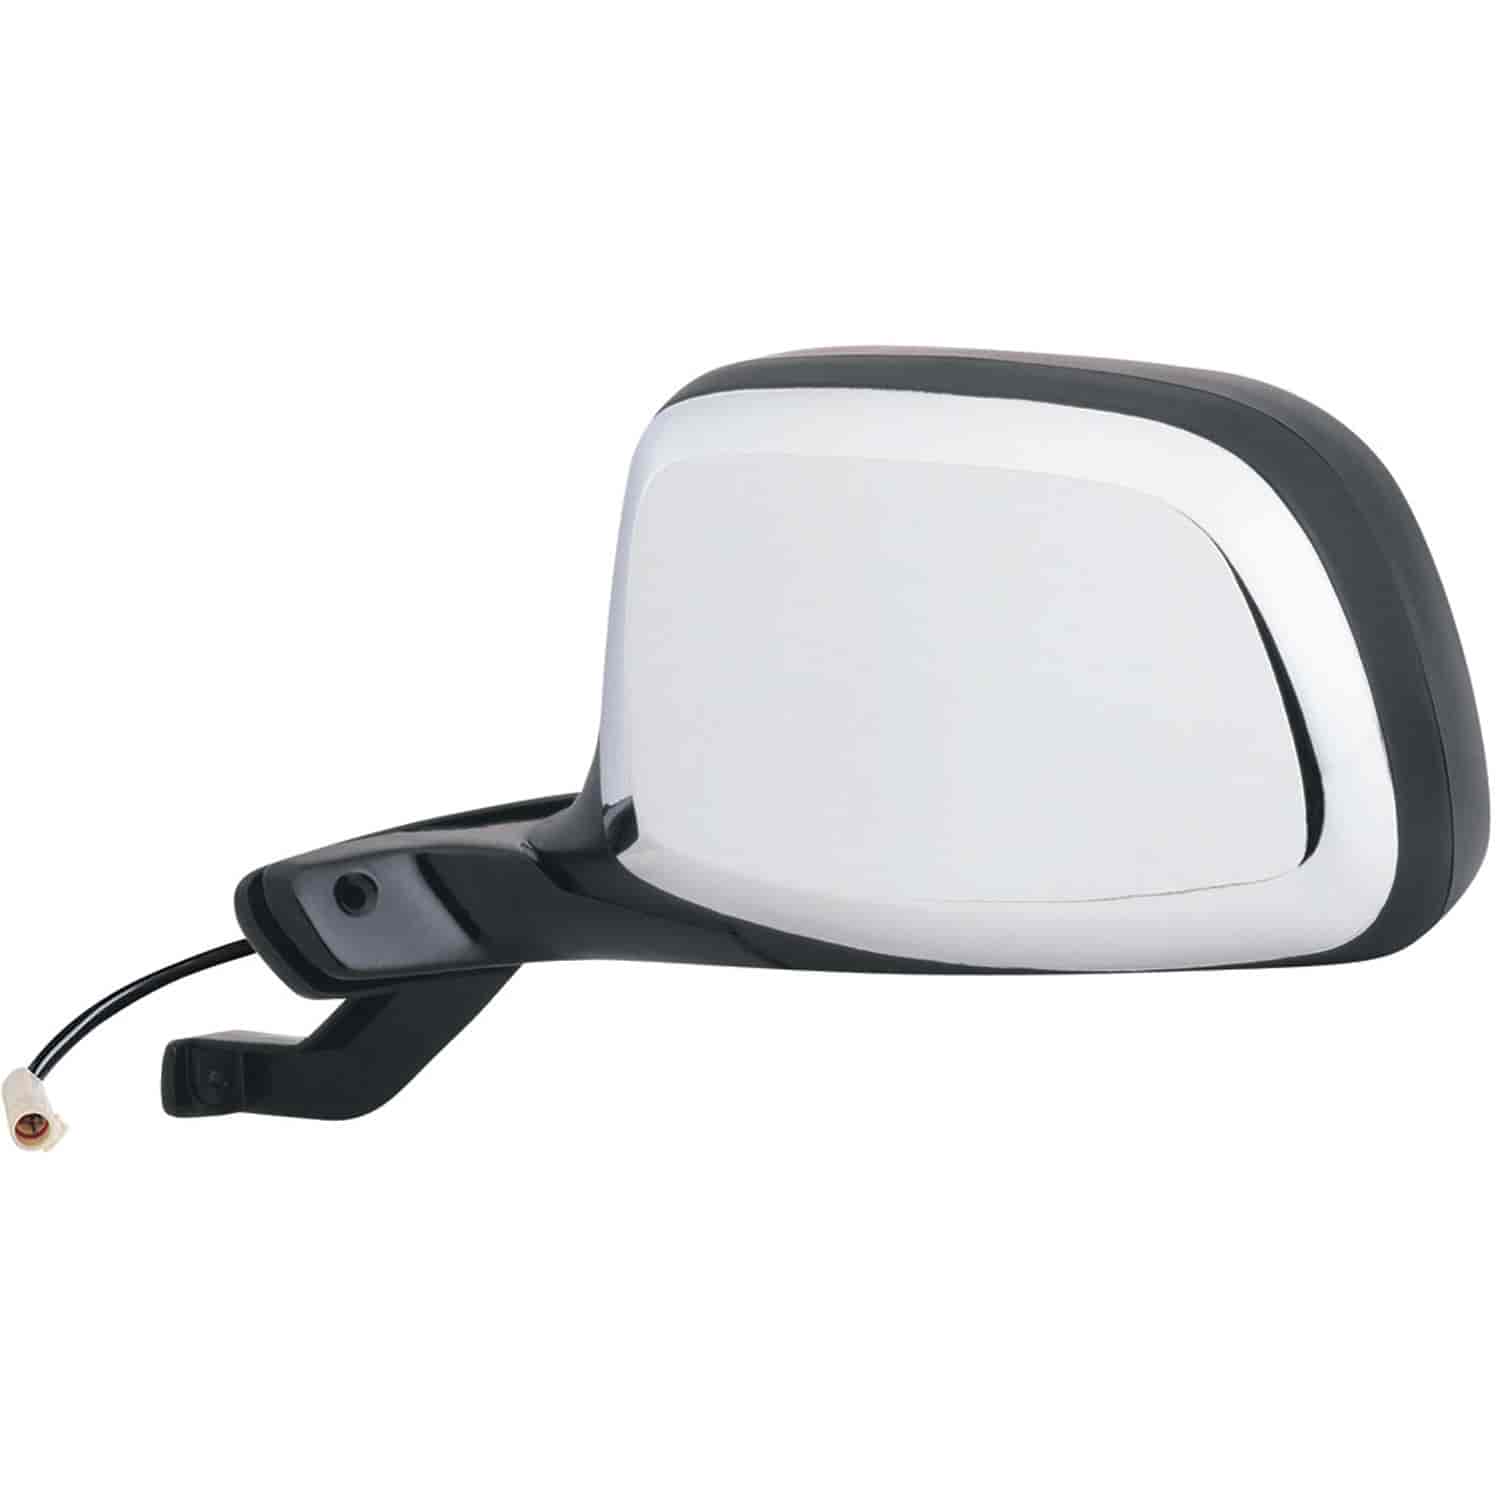 OEM Style Replacement mirror for 92-96 Bronco F150